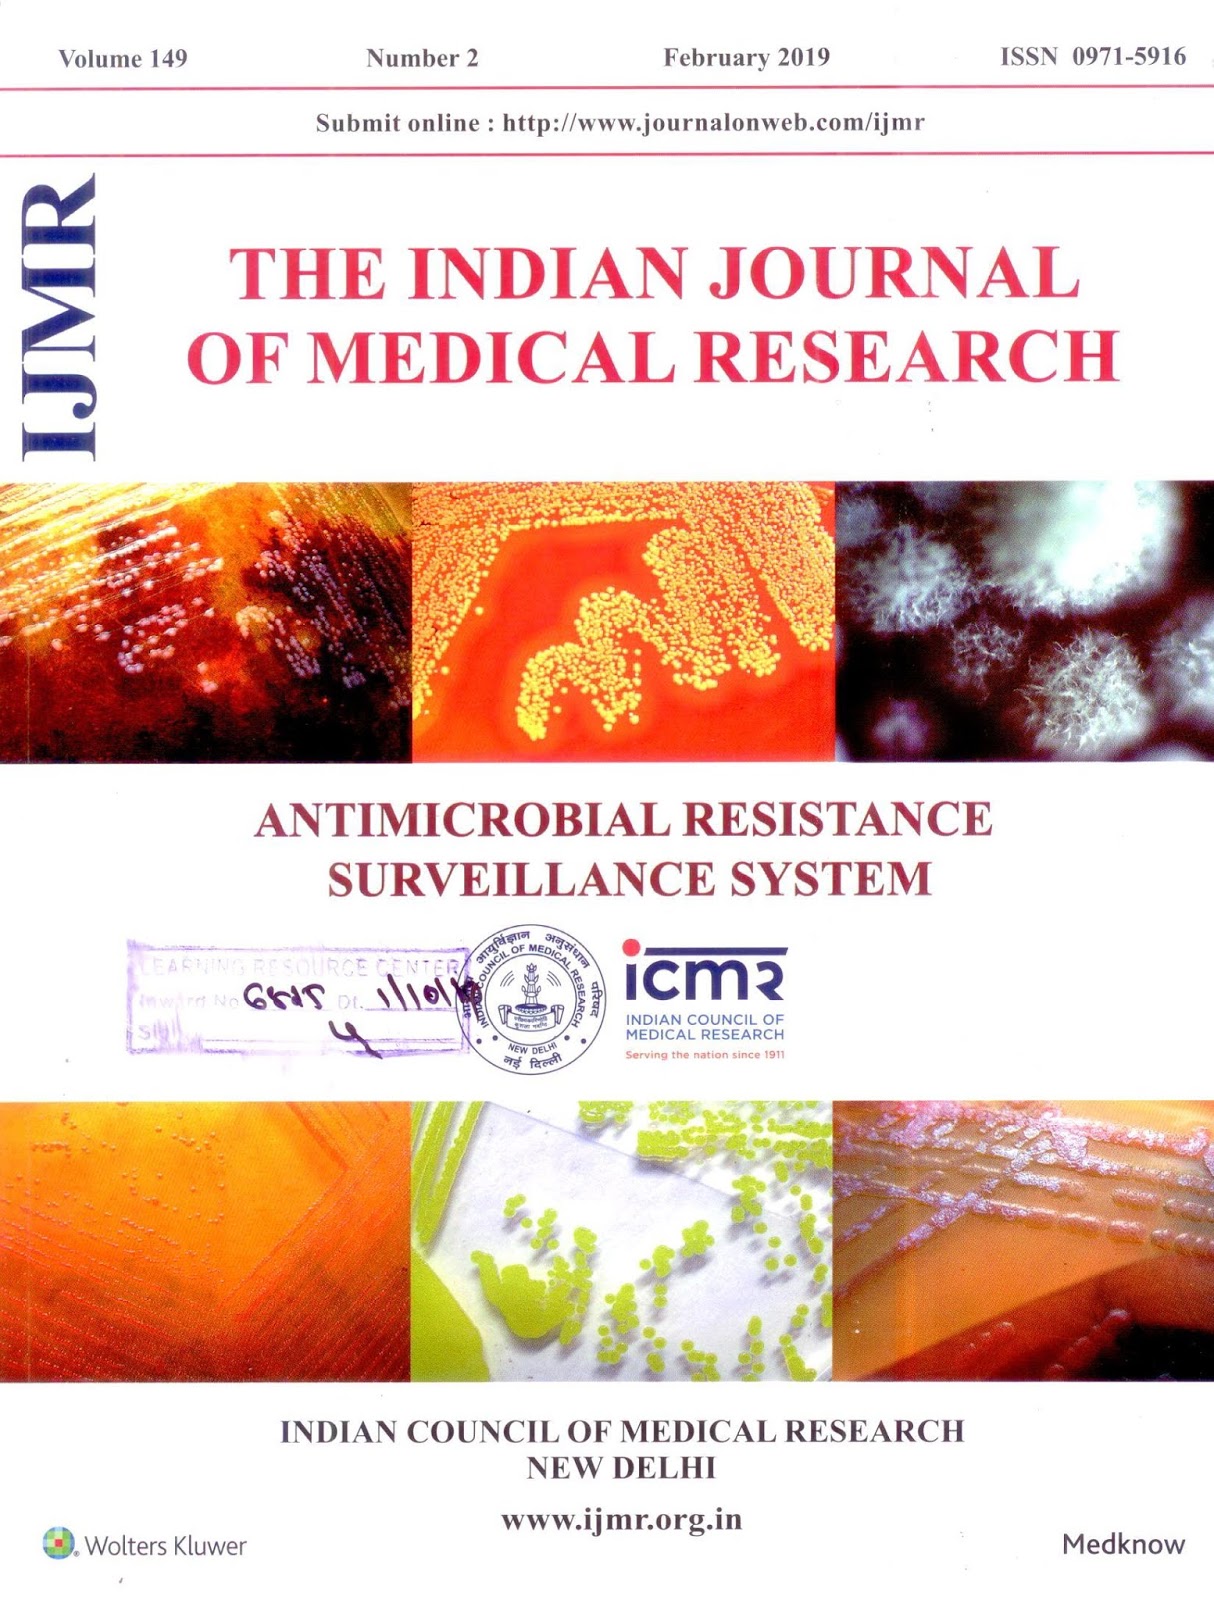 http://www.ijmr.org.in/showbackissue.asp?issn=0971-5916;year=2019;volume=149;issue=2